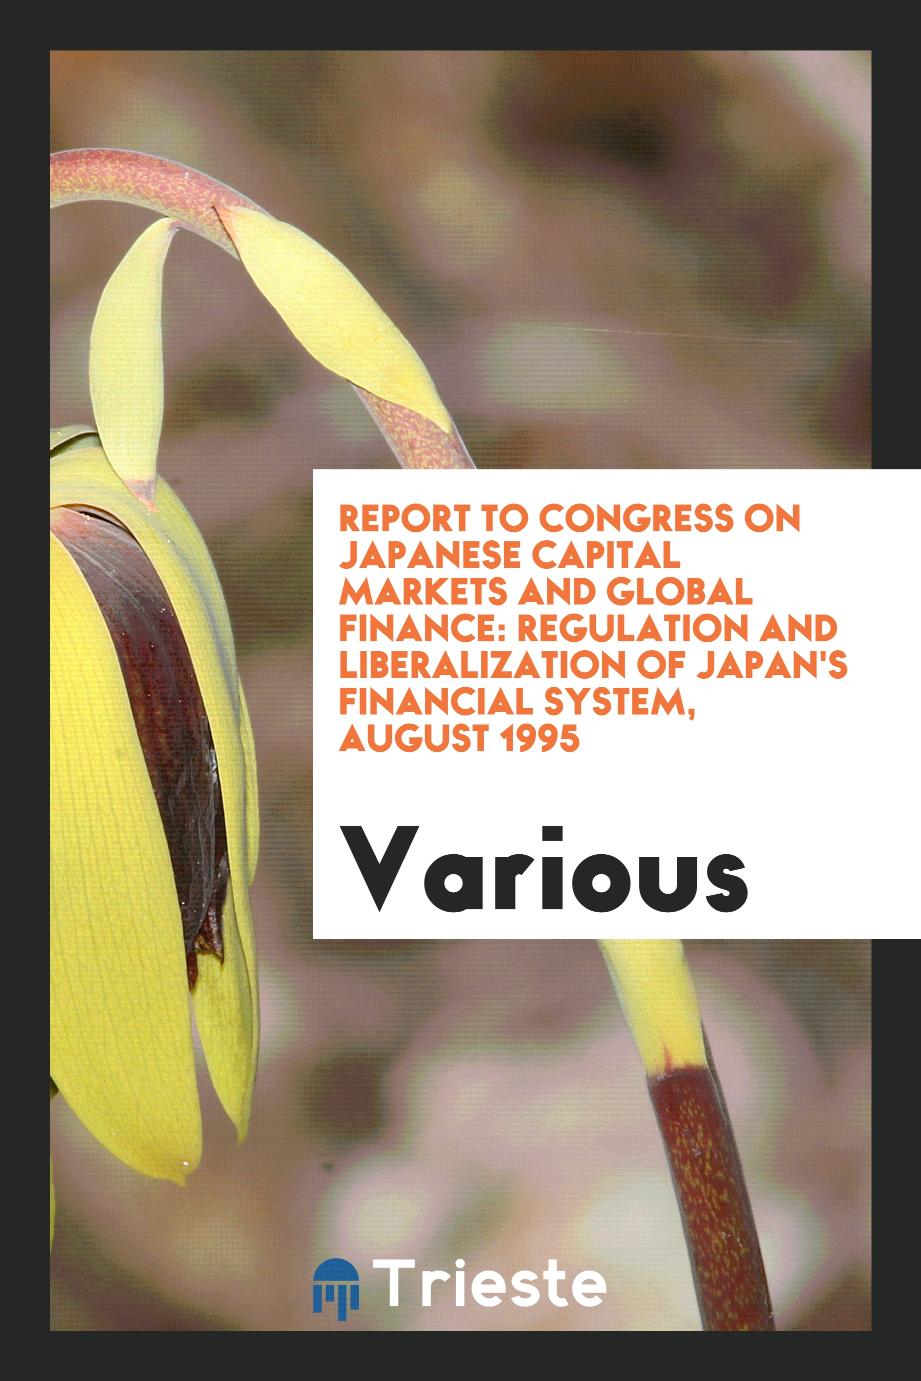 Report to congress on Japanese capital markets and global finance: Regulation and liberalization of Japan's financial system, August 1995